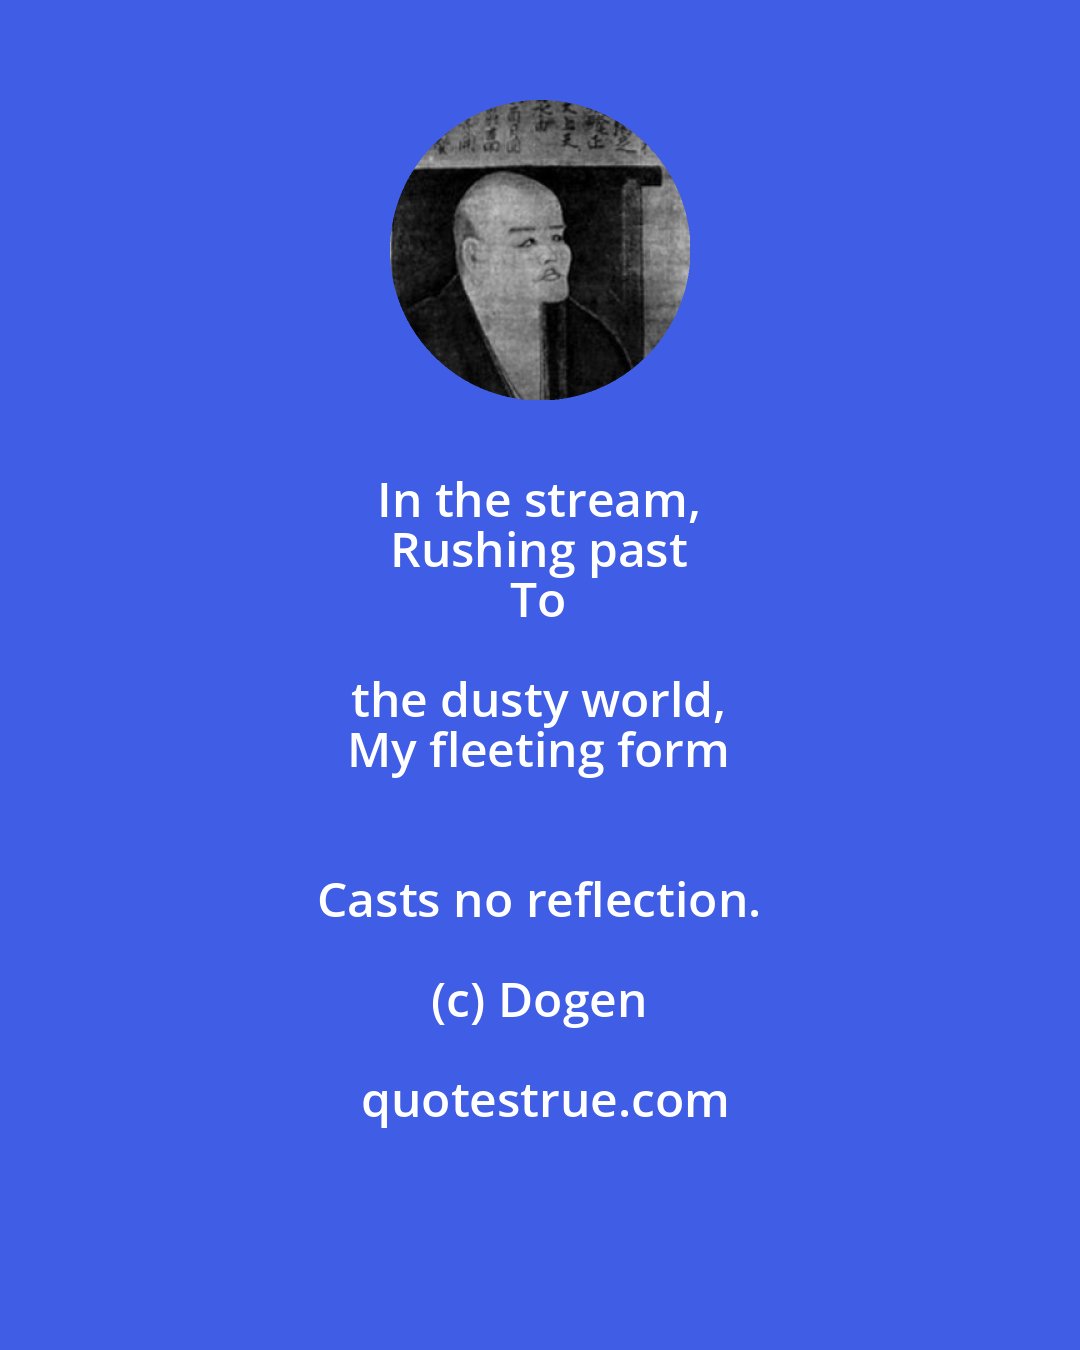 Dogen: In the stream, 
 Rushing past 
 To the dusty world, 
 My fleeting form 
 Casts no reflection.